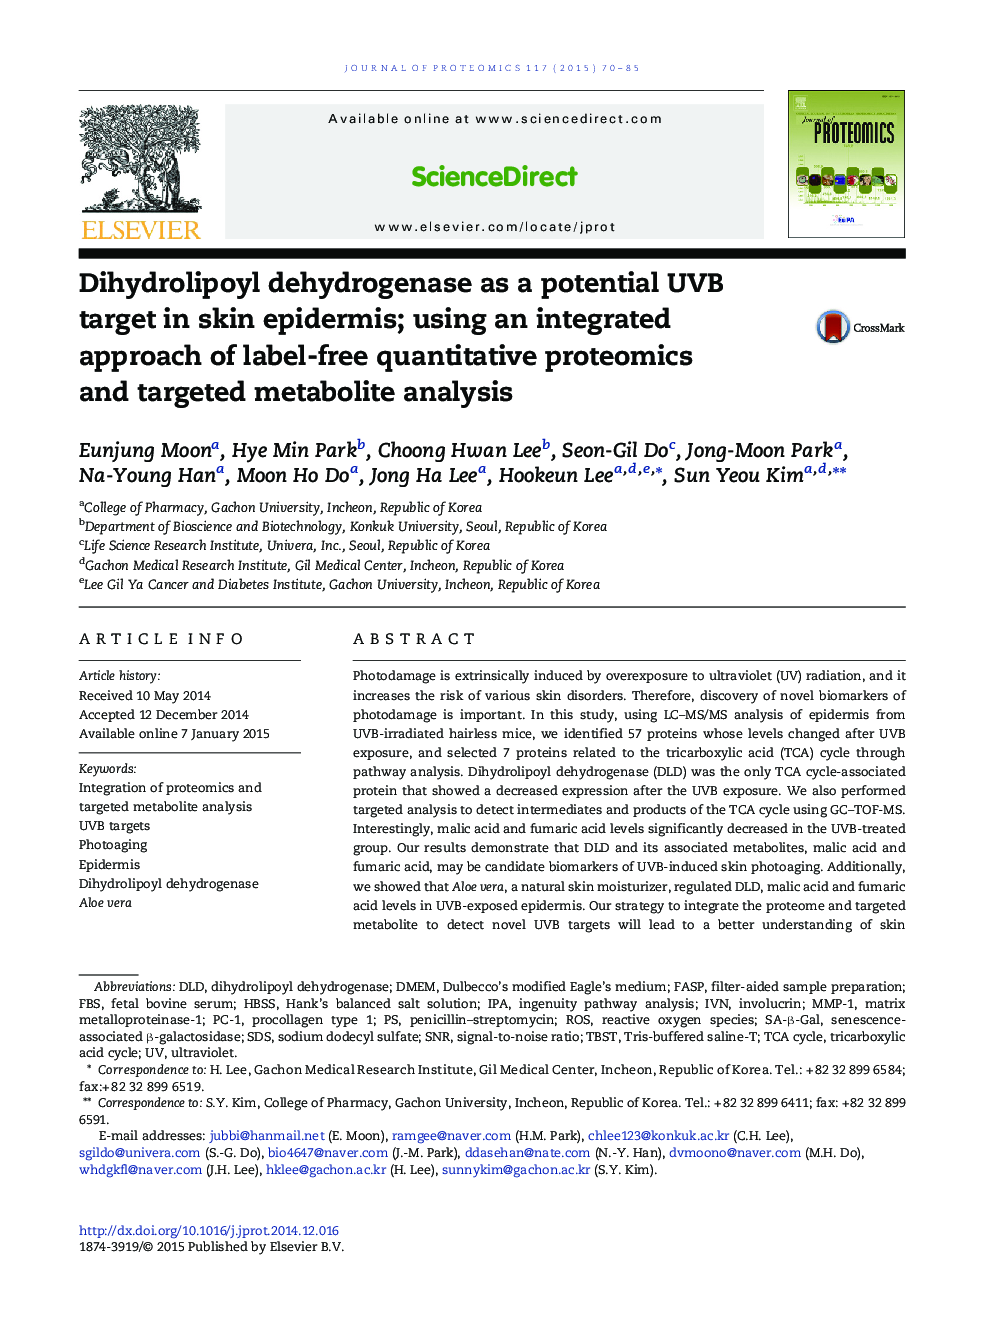 Dihydrolipoyl dehydrogenase as a potential UVB target in skin epidermis; using an integrated approach of label-free quantitative proteomics and targeted metabolite analysis